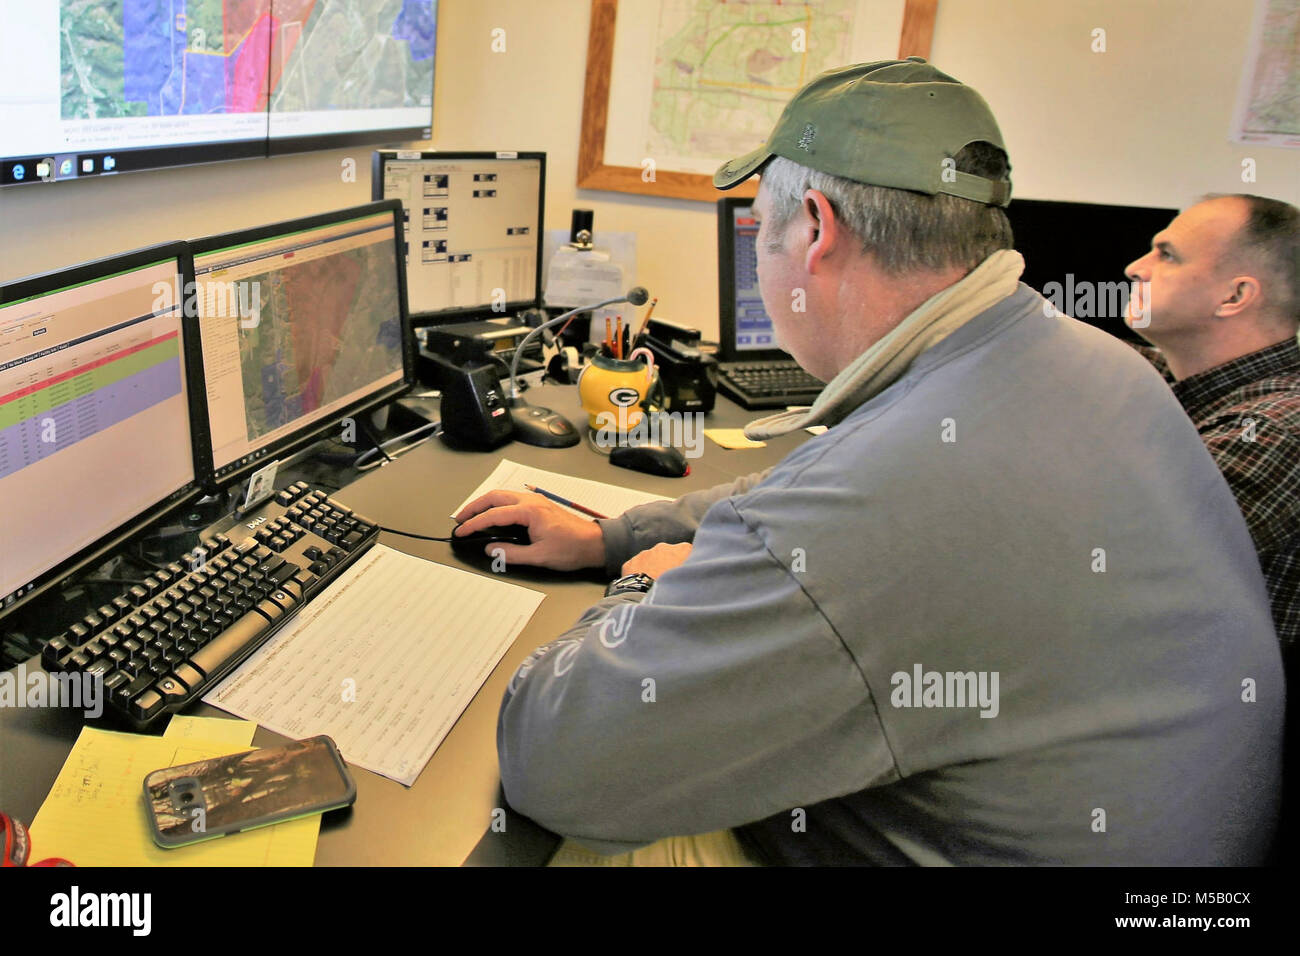 Range Control Technician Mark Confer and Brent Friedl with the Directorate of Plans, Training, Mobilization and Security work developing grid coordinates at the Fire Desk on Jan. 16, 2018, at Fort McCoy, Wis. The desk operates communications with units using the range complex as well as Range Maintenance and other personnel throughout 46,000 acres of training areas on Fort McCoy. (U.S. Army Stock Photo